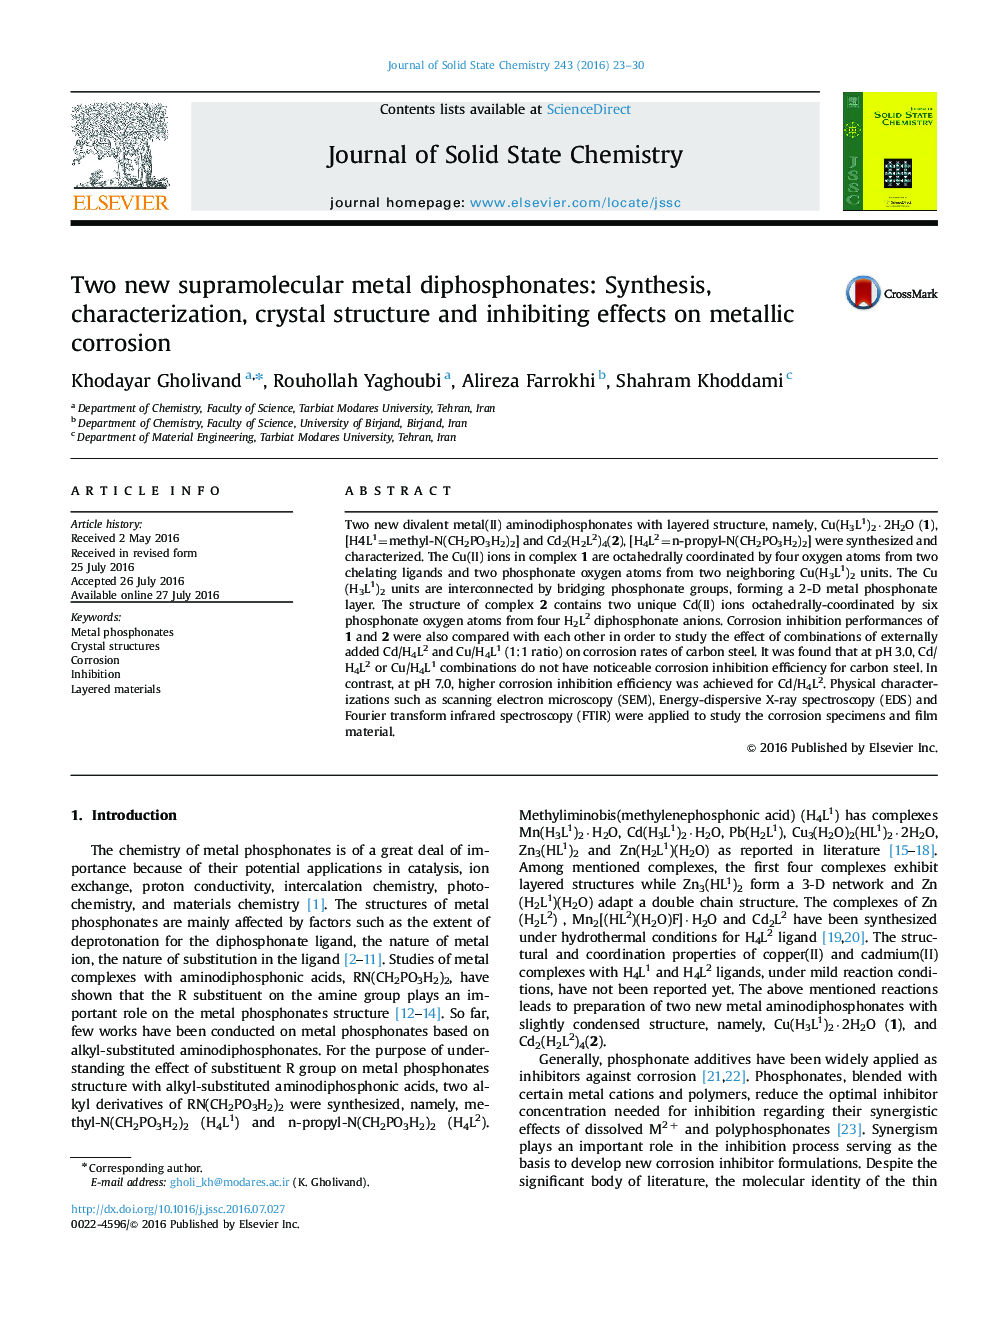 Two new supramolecular metal diphosphonates: Synthesis, characterization, crystal structure and inhibiting effects on metallic corrosion